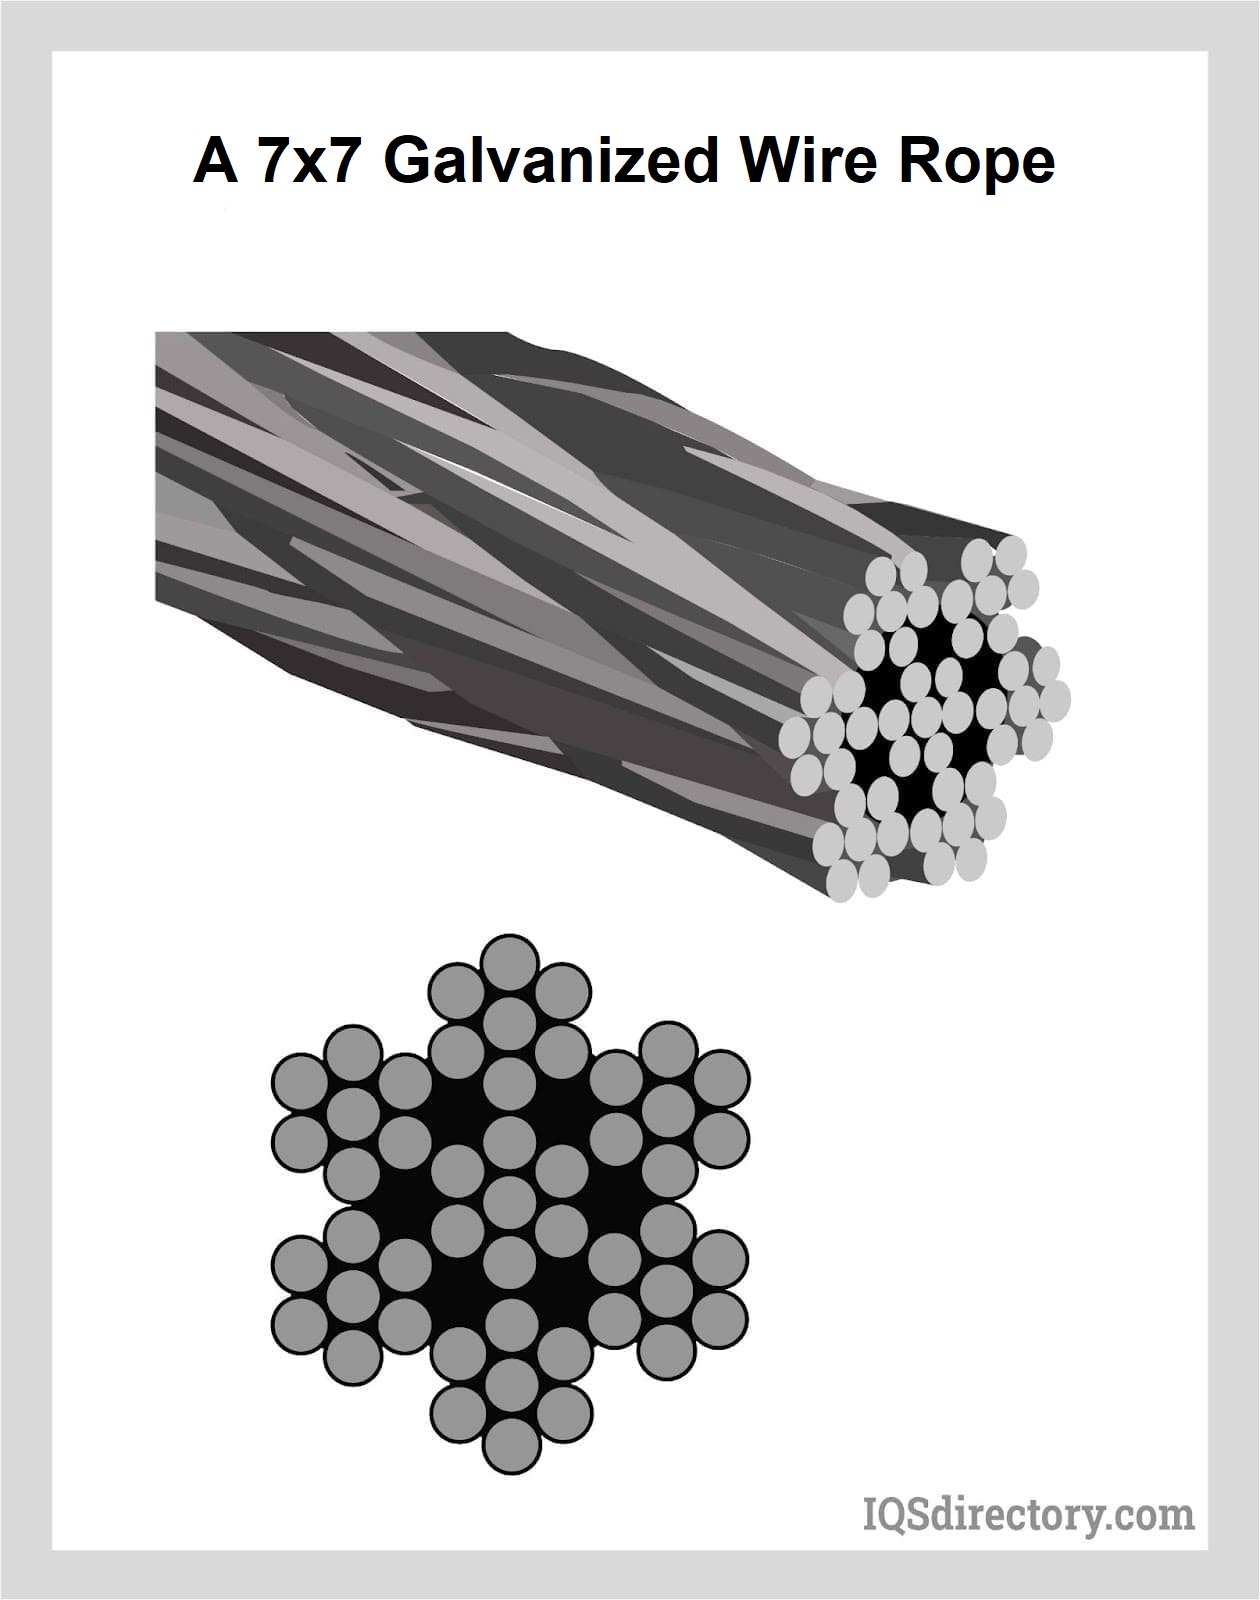 Wire Rope Assemblies: Types, Applications, Benefits, and Considerations